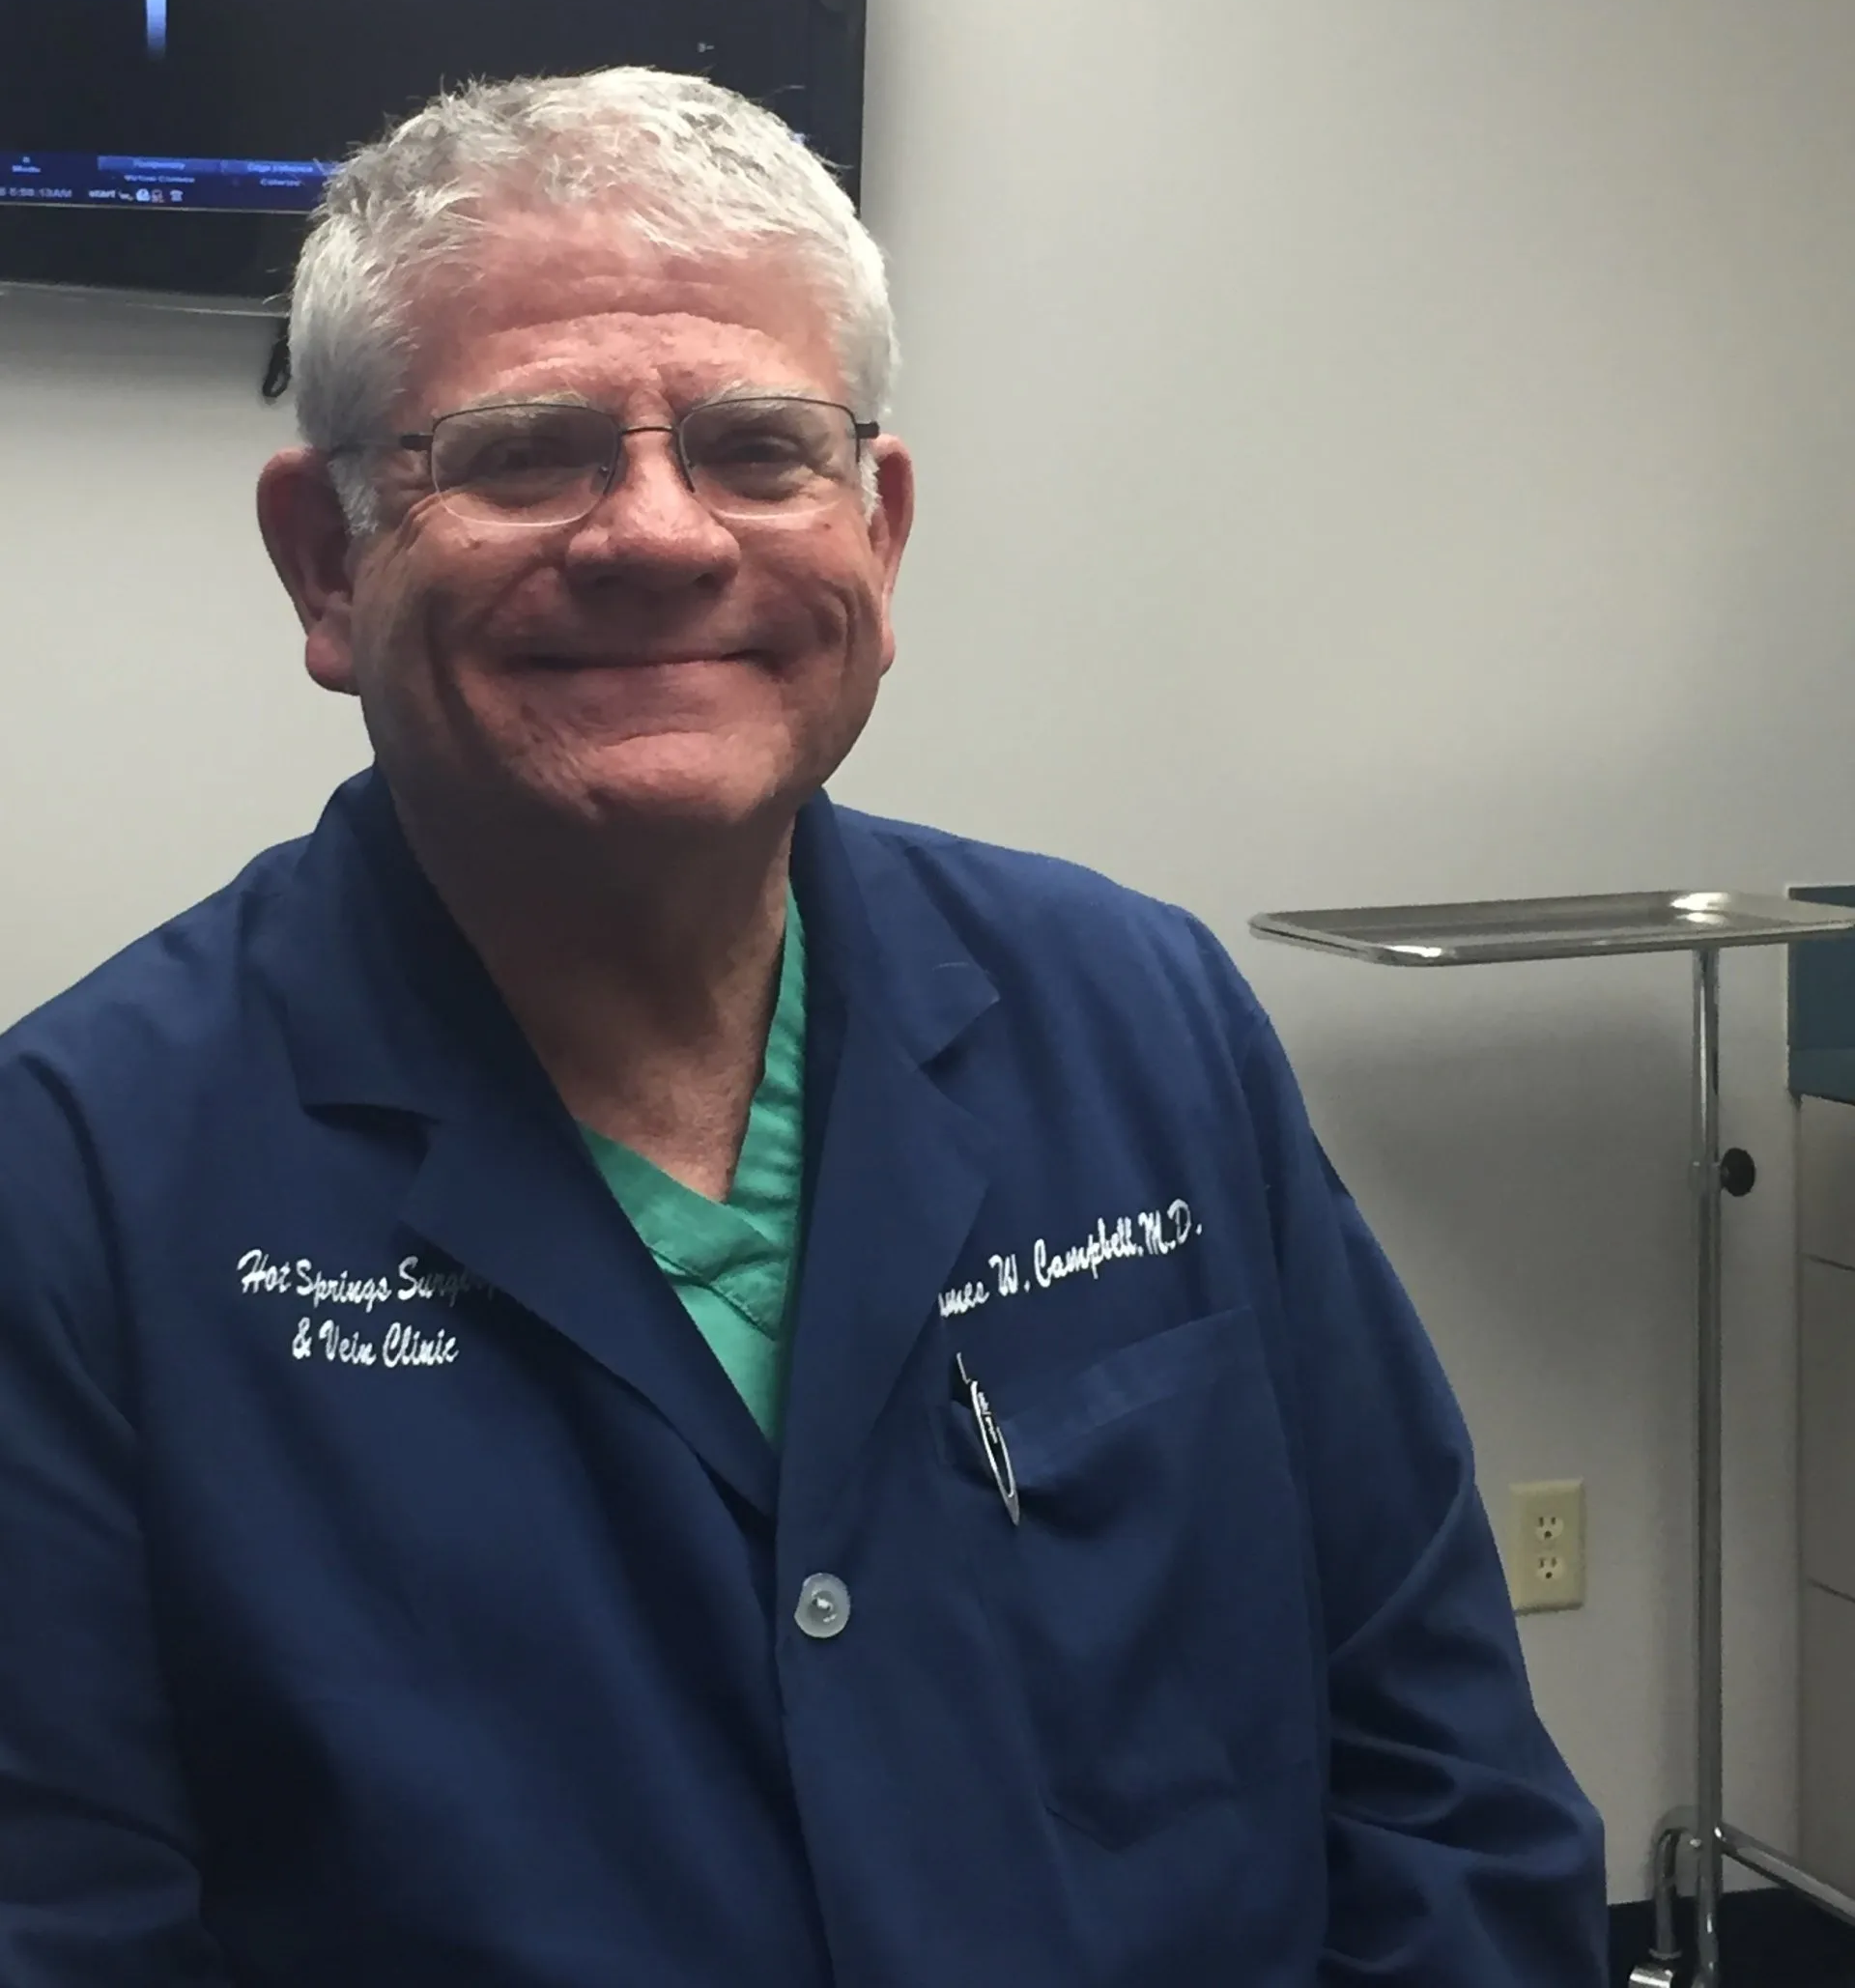 Dr. JAmes W. Campbell of Hot Springs Surgery and Vein in Hot Springs, AR